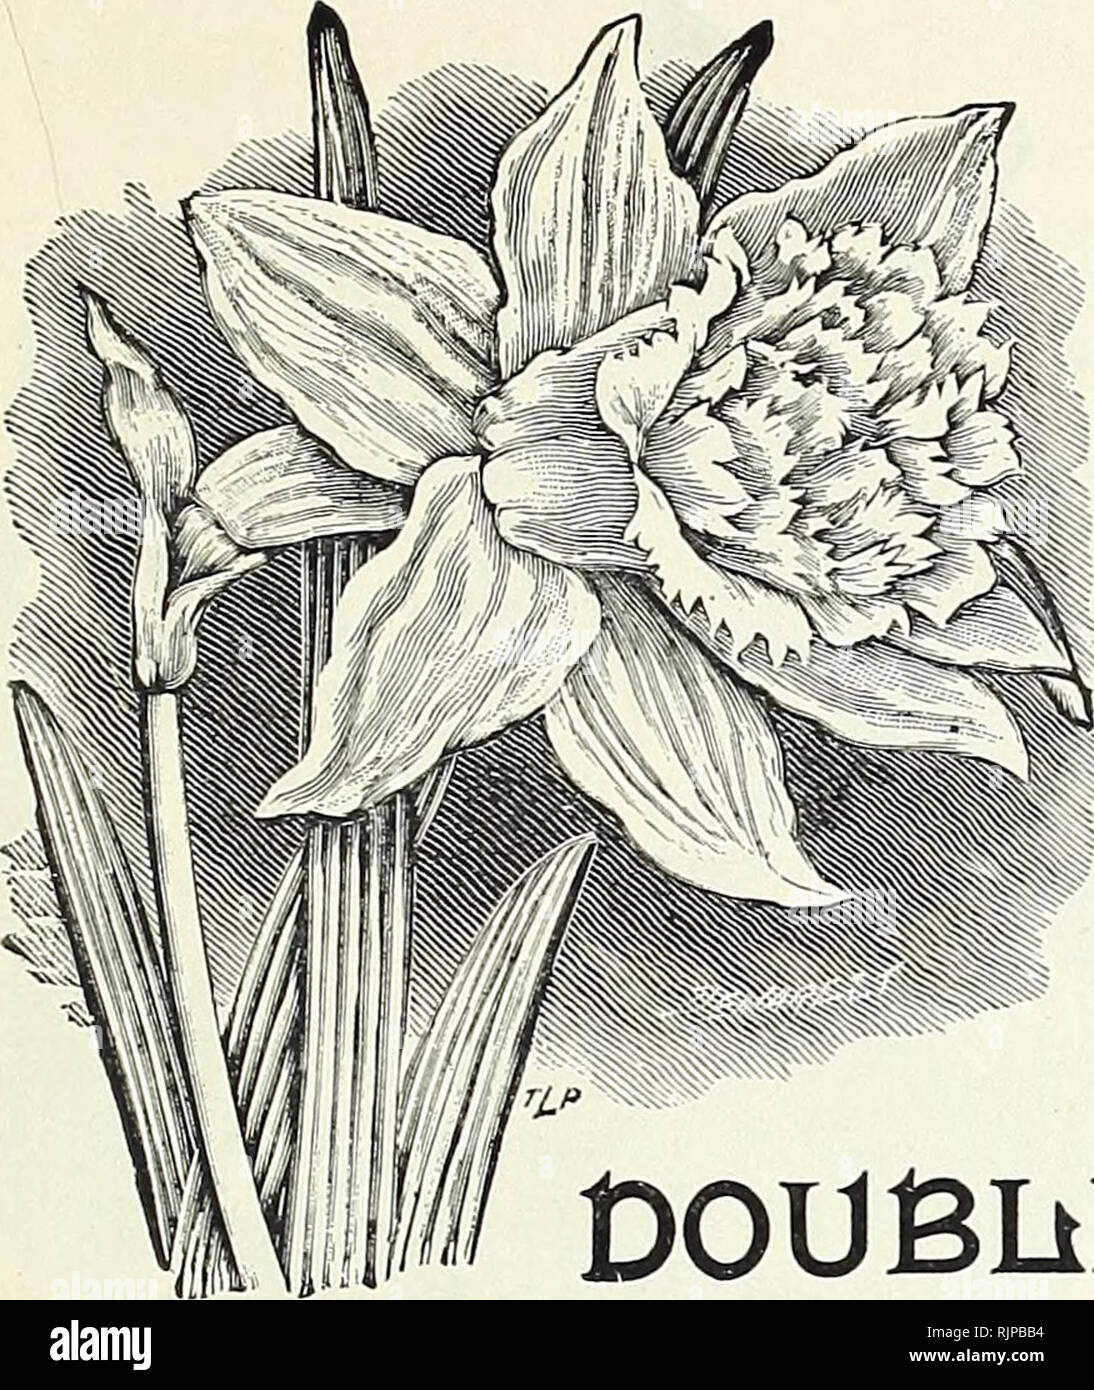 . Autumn bulbs : 1894. Gardening Equipment and supplies Catalogs; Seeds Catalogs; Bulbs (Plants) Catalogs; Flowers Catalogs; Flowers Seeds Catalogs. PETER HENDERSON &amp; CO., NEW YORK.-BULBS. 19. DOUBliE Jlaf eissas w Daffodils t&gt;ouble | Camellia plotuered n apeissus. If desired by mail, add at the rate of 10c. per dozen for postage, mailed free. YELLOW VARIETY. Incomparable fl. pi. &quot; Butter and Eggs.&quot; Full double flowers of rich yellow, with orange nectary, splendid forcing variety. 3 for 10c, 25c. doz., §1.50 100. &quot;GARDENIA FLOWERED&quot; WHITE VARIETY. Alba Plena Odorata Stock Photo